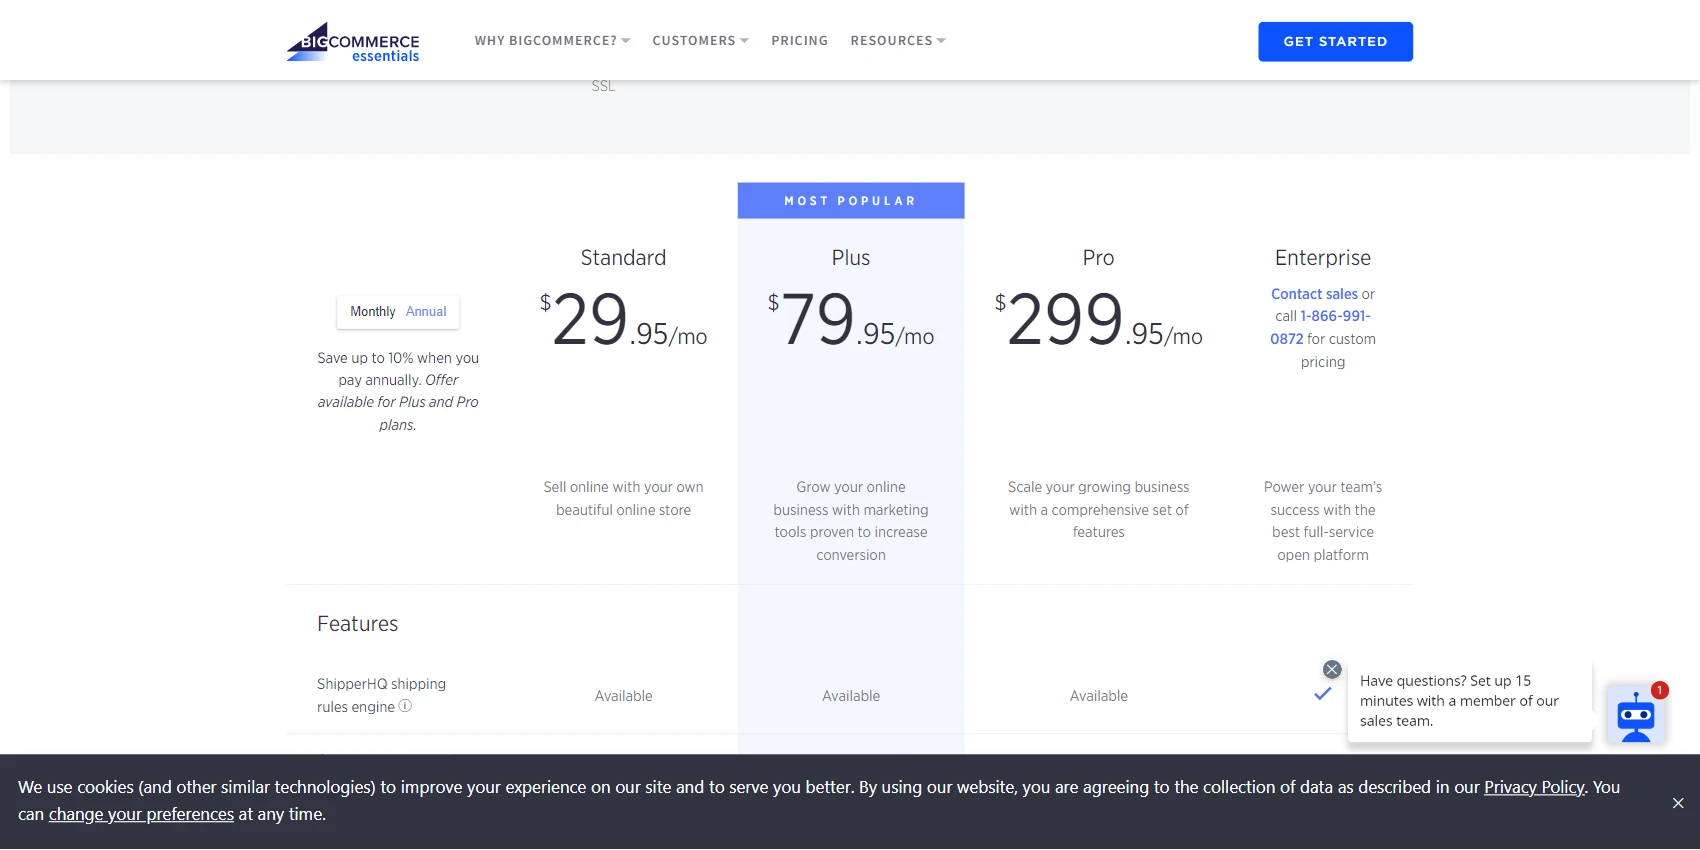 3. BigCommerce Pricing